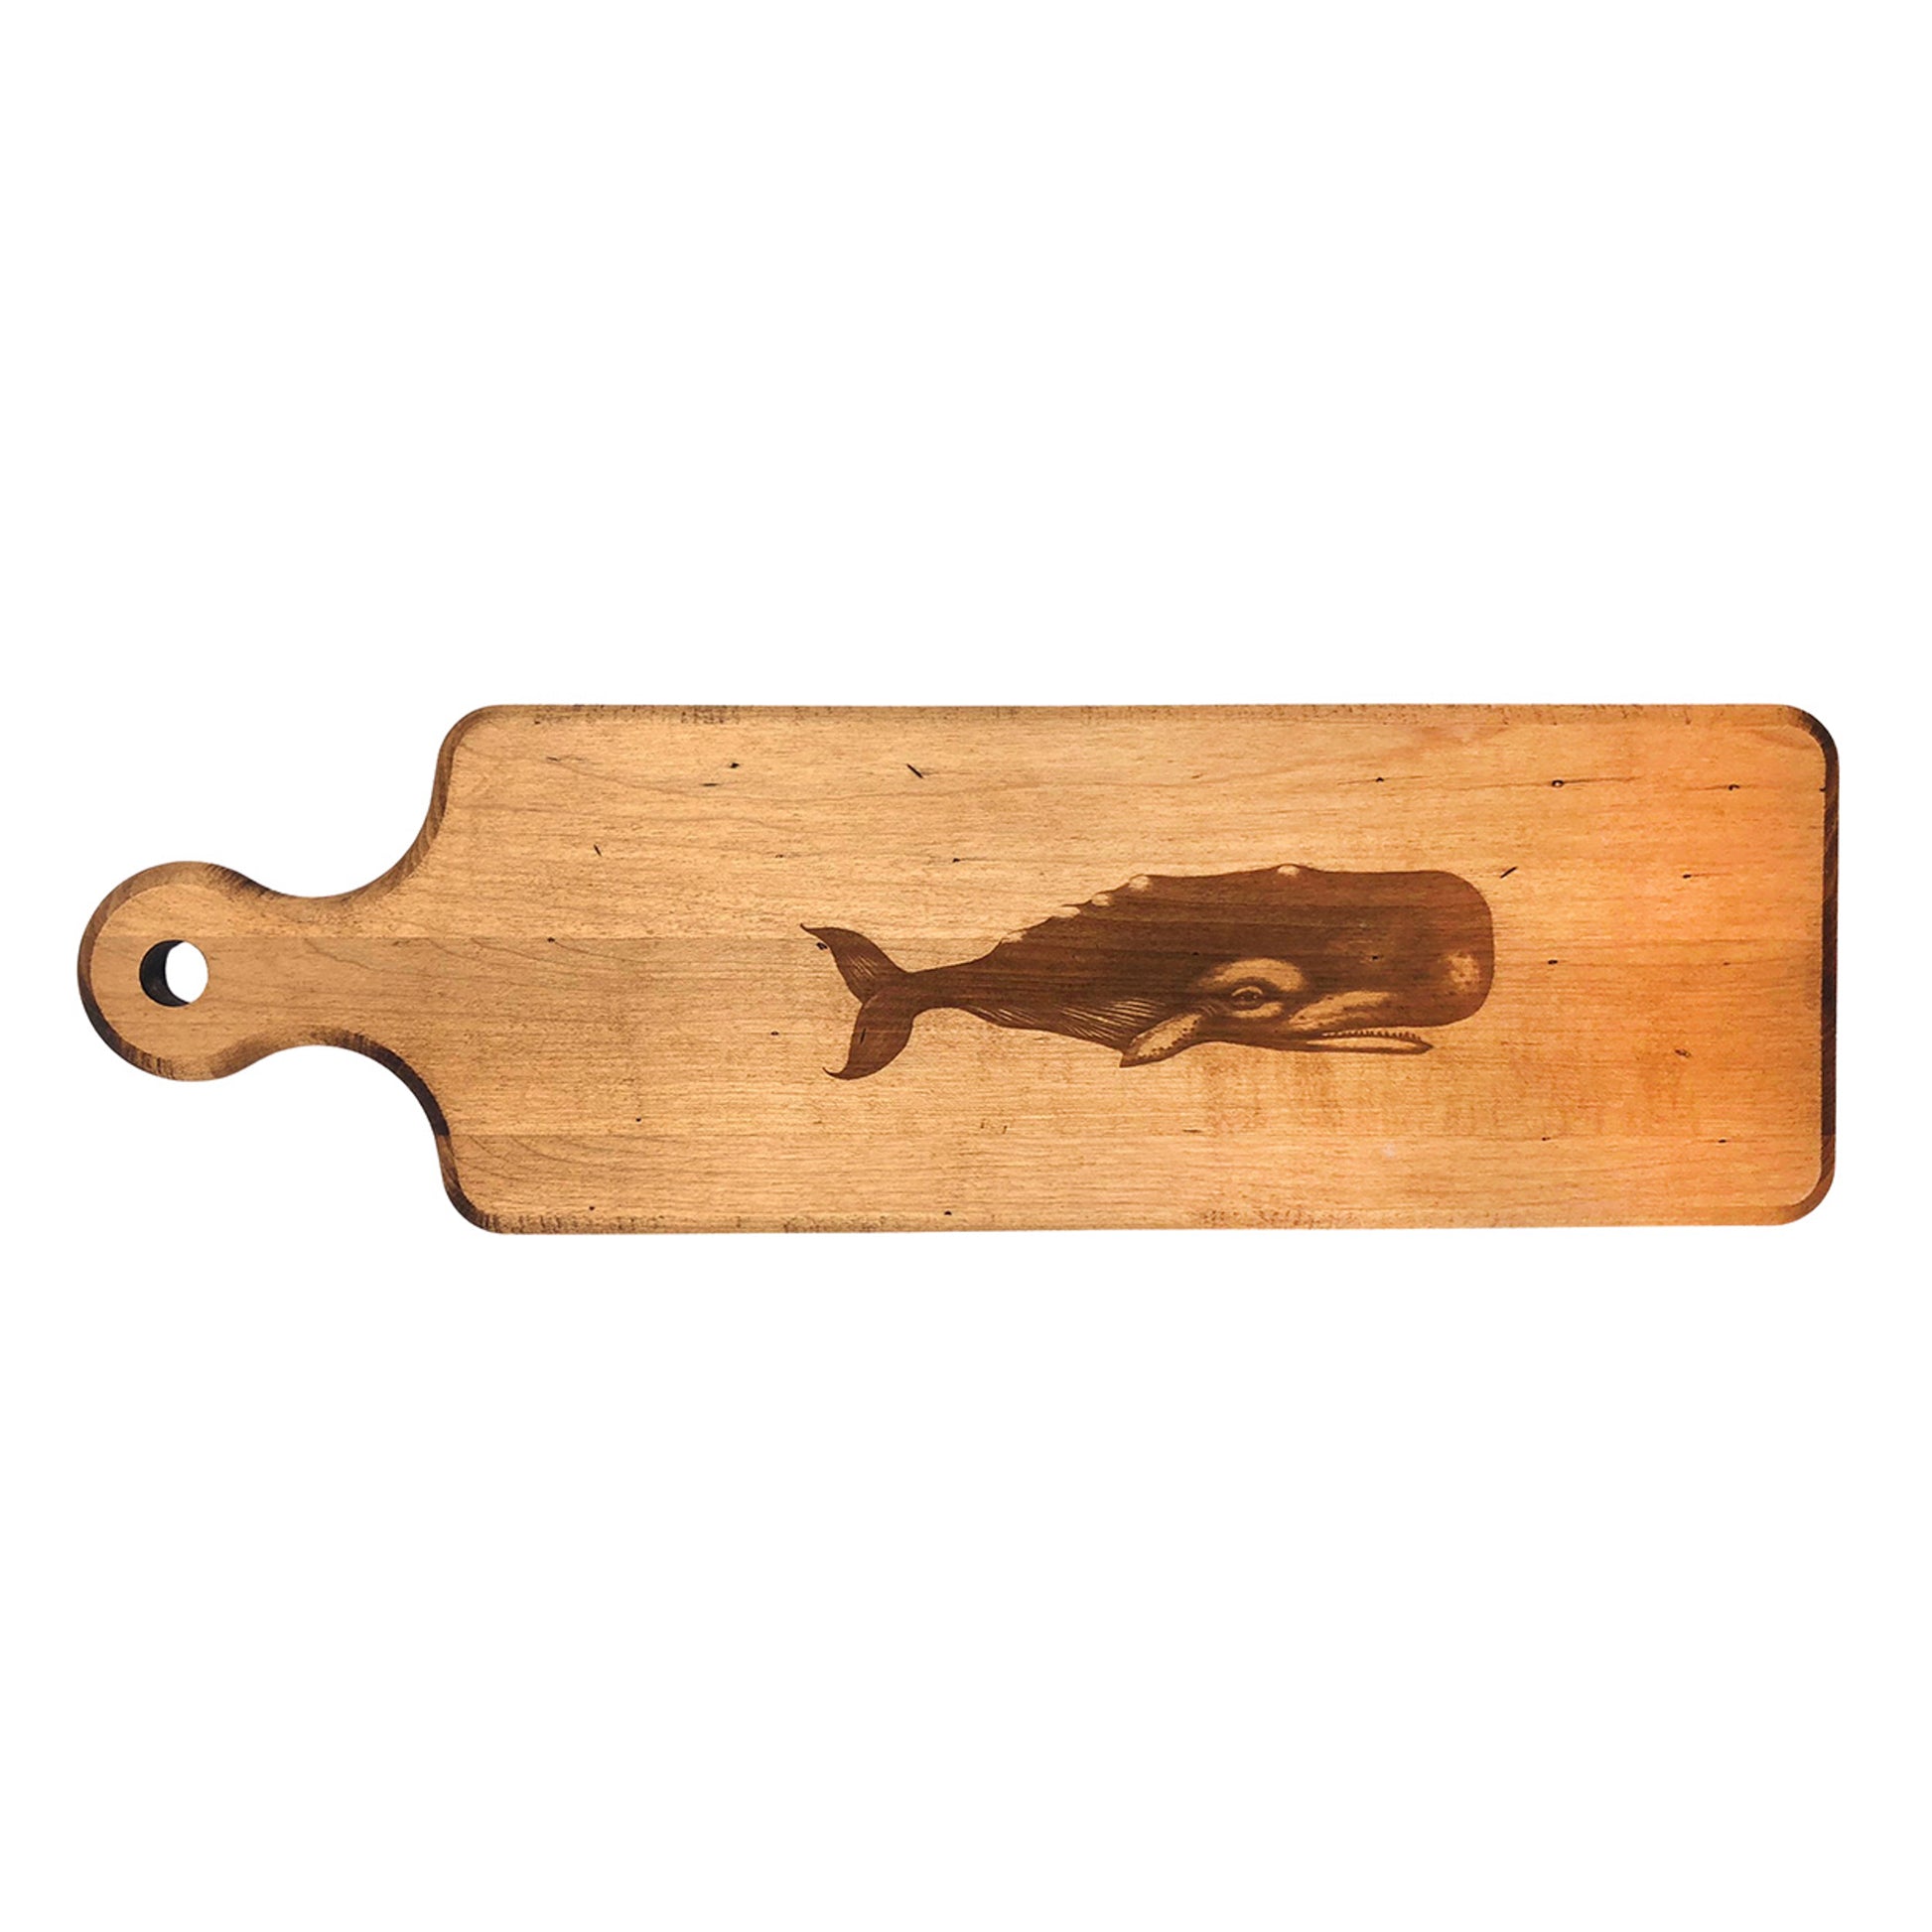 Laura Zindel Maple Artisan Plank Serving Board - More designs available